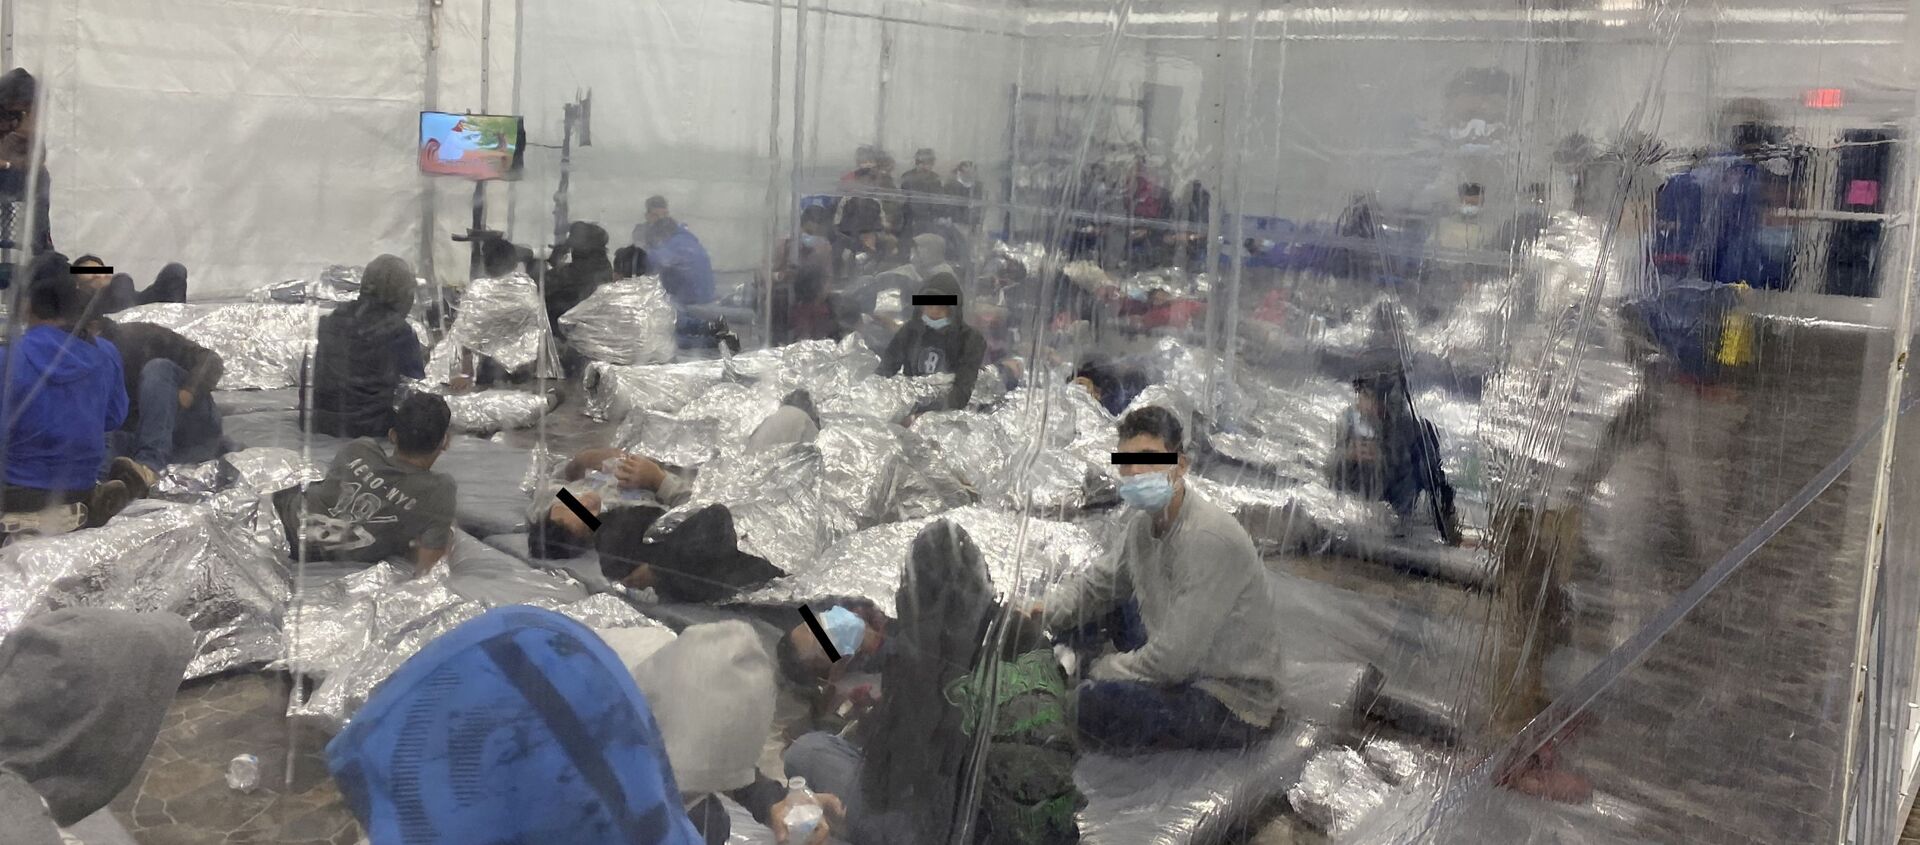 Migrants crowd a room with walls of plastic sheeting at the U.S. Customs and Border Protection temporary processing center in Donna, Texas, U.S. in a recent photograph released March 22, 2021 - Sputnik International, 1920, 29.03.2021